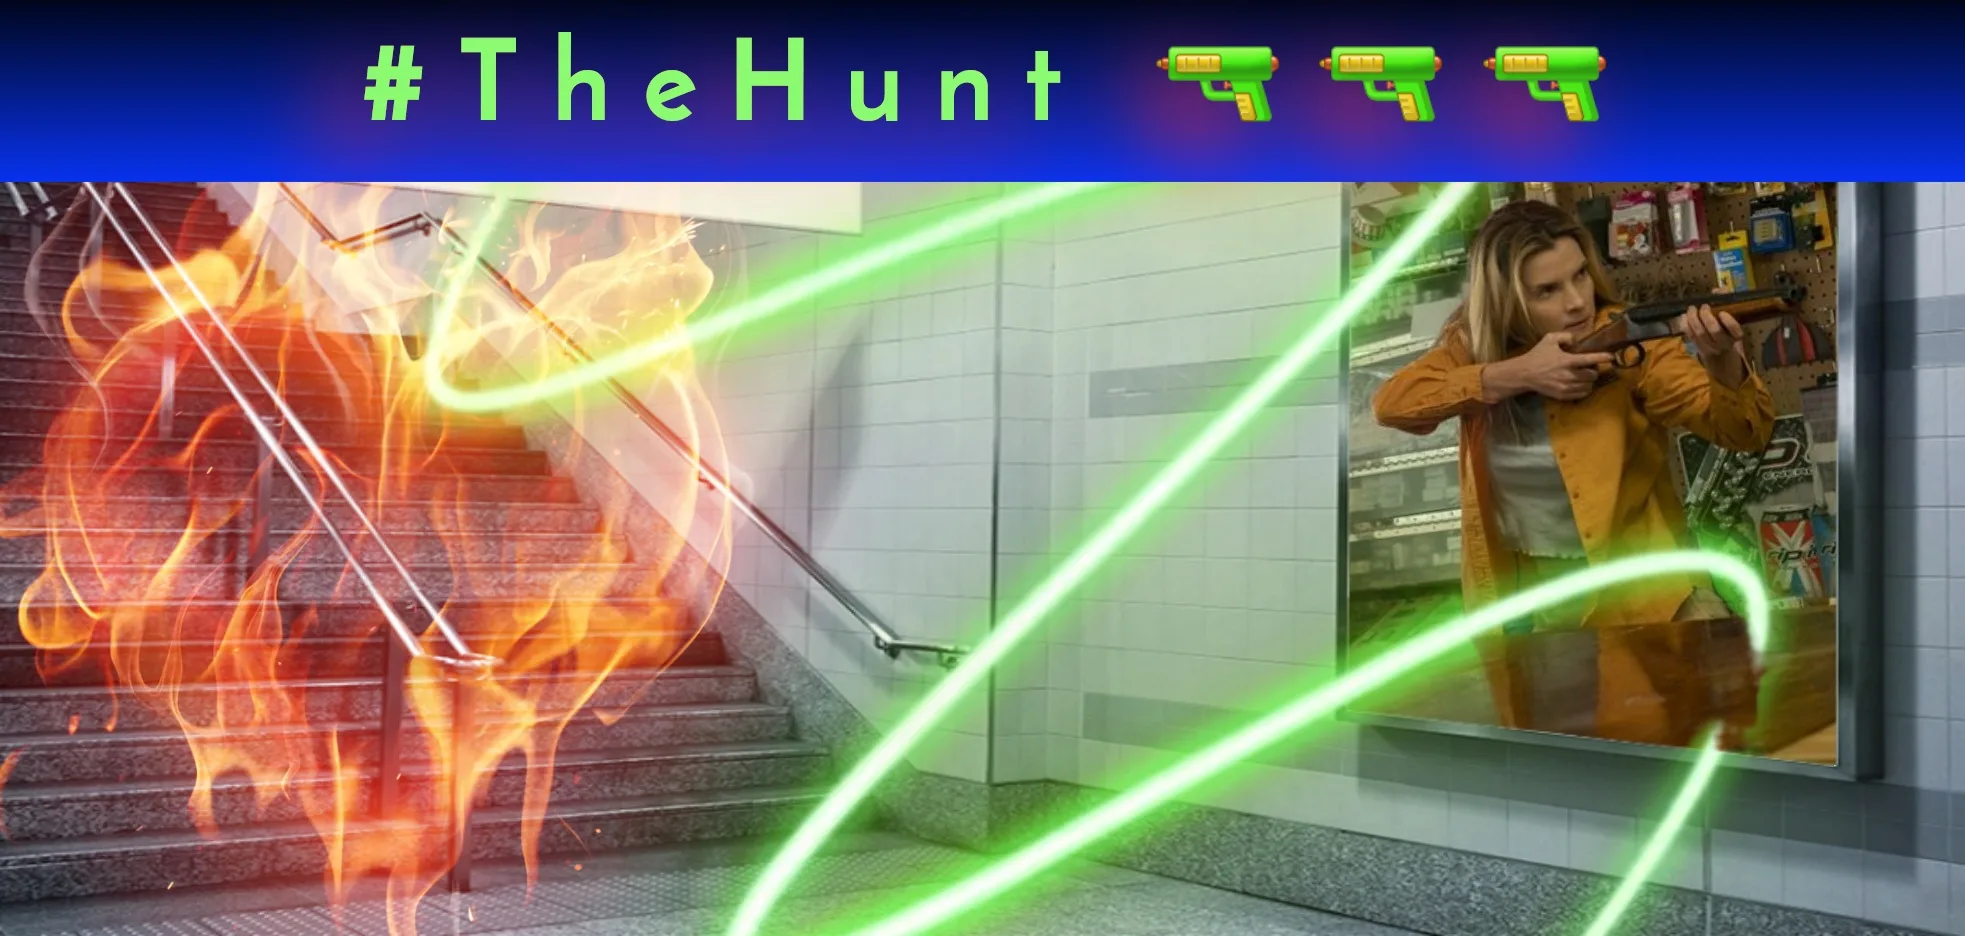 “THE HUNT” Is Just A Messed Up Publicity Stunt and Brutal Bloody Festival post thumbnail image